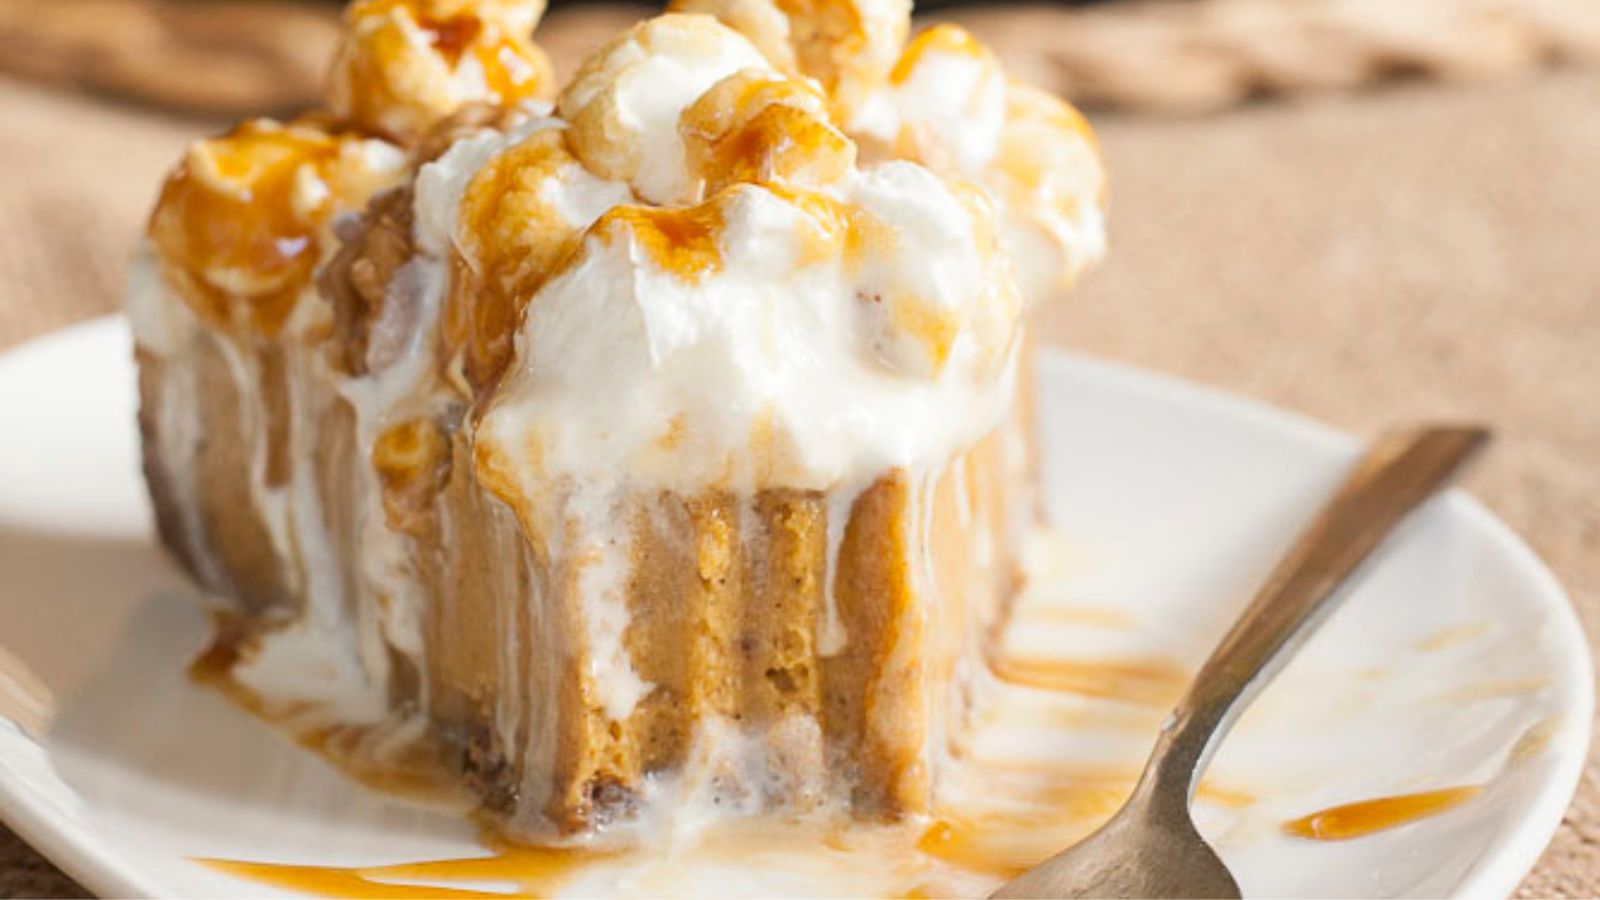 20 Easy Fall Dessert Recipes That Make the Most of Baking Season